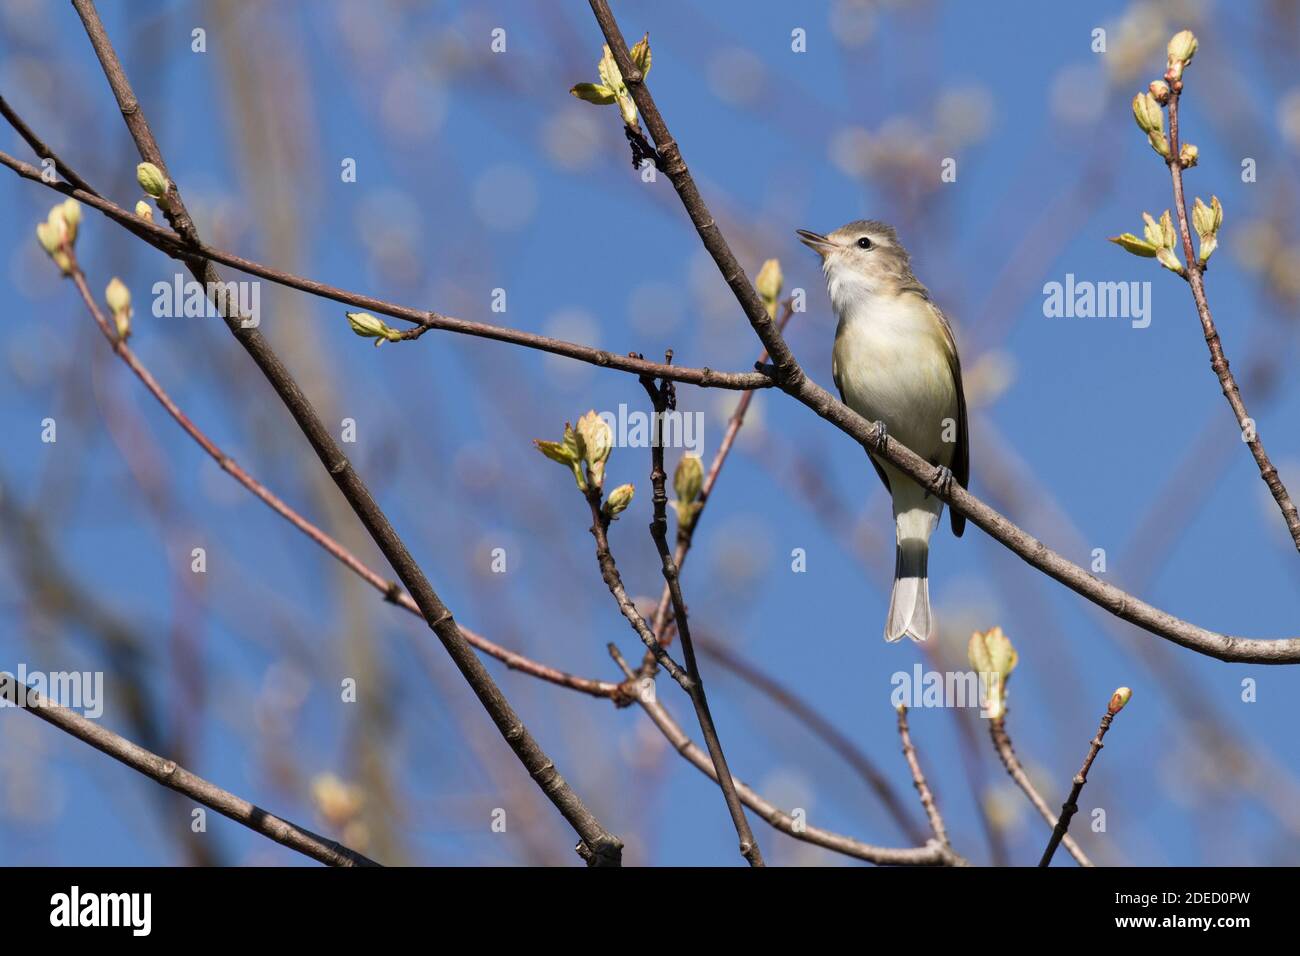 Warbling Vireo (Vireo gilvus) perched on a branch, Long Island, New York Stock Photo